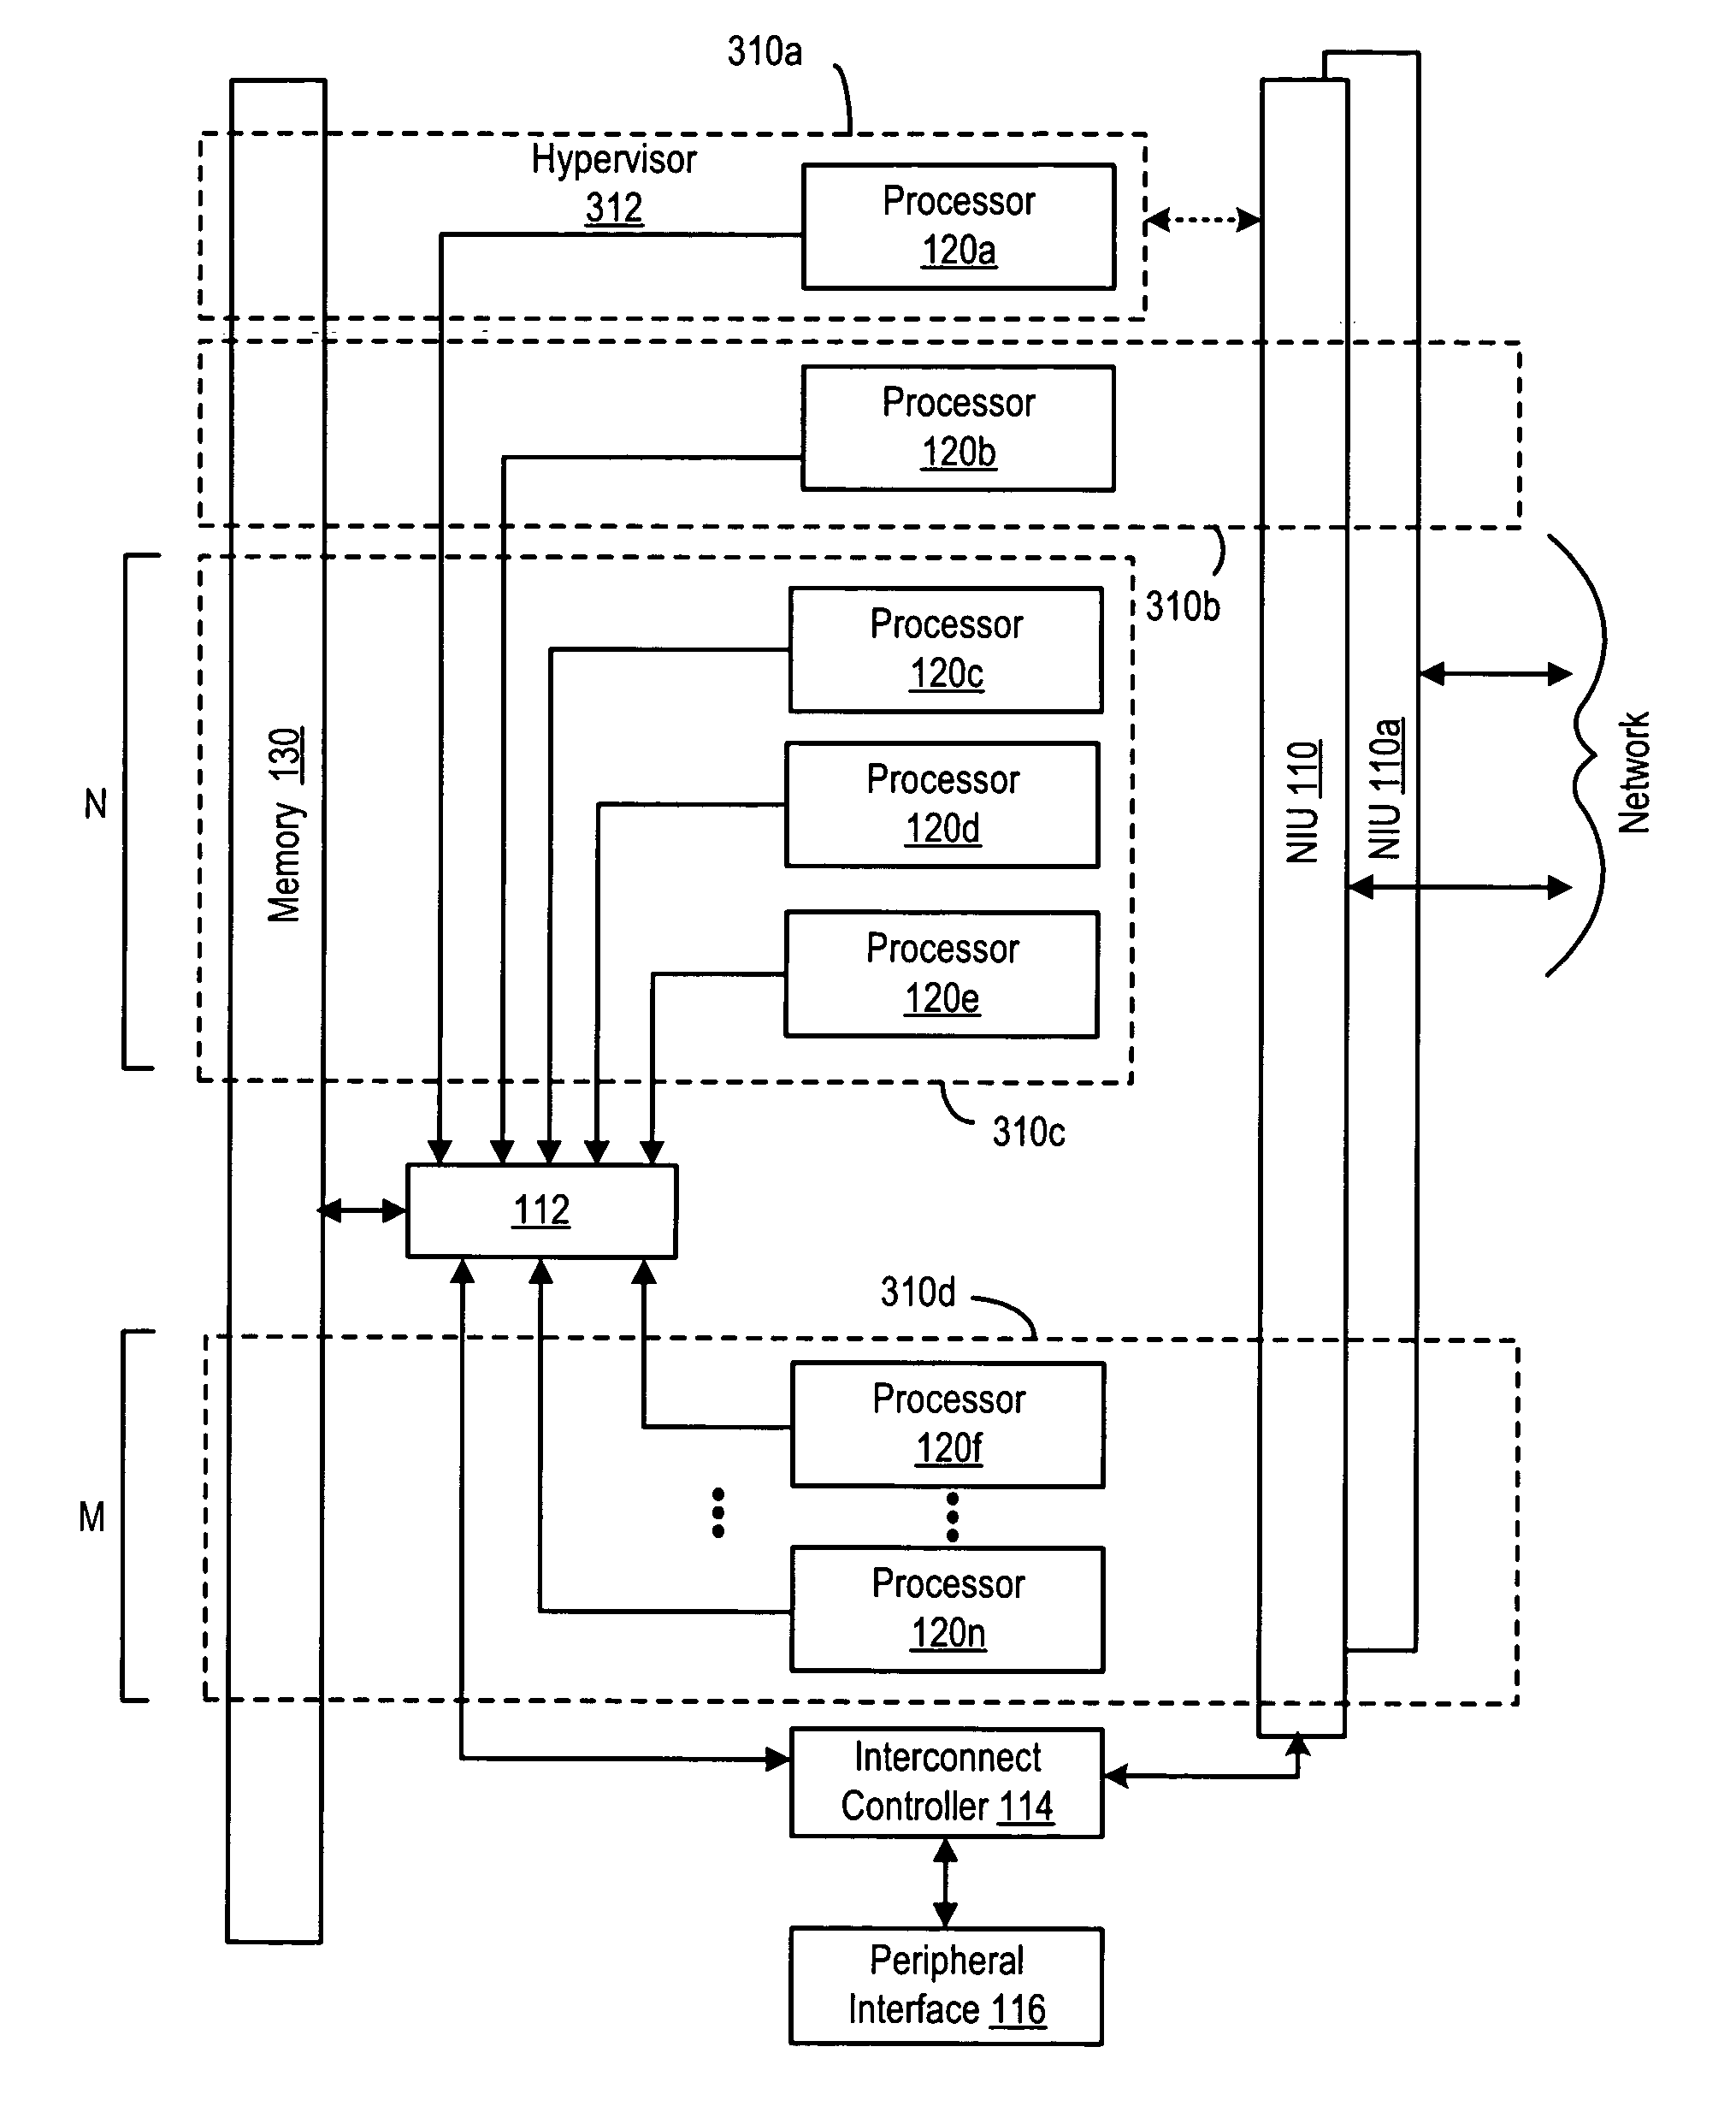 Method and apparatus for arbitrarily mapping functions to preassigned processing entities in a network system